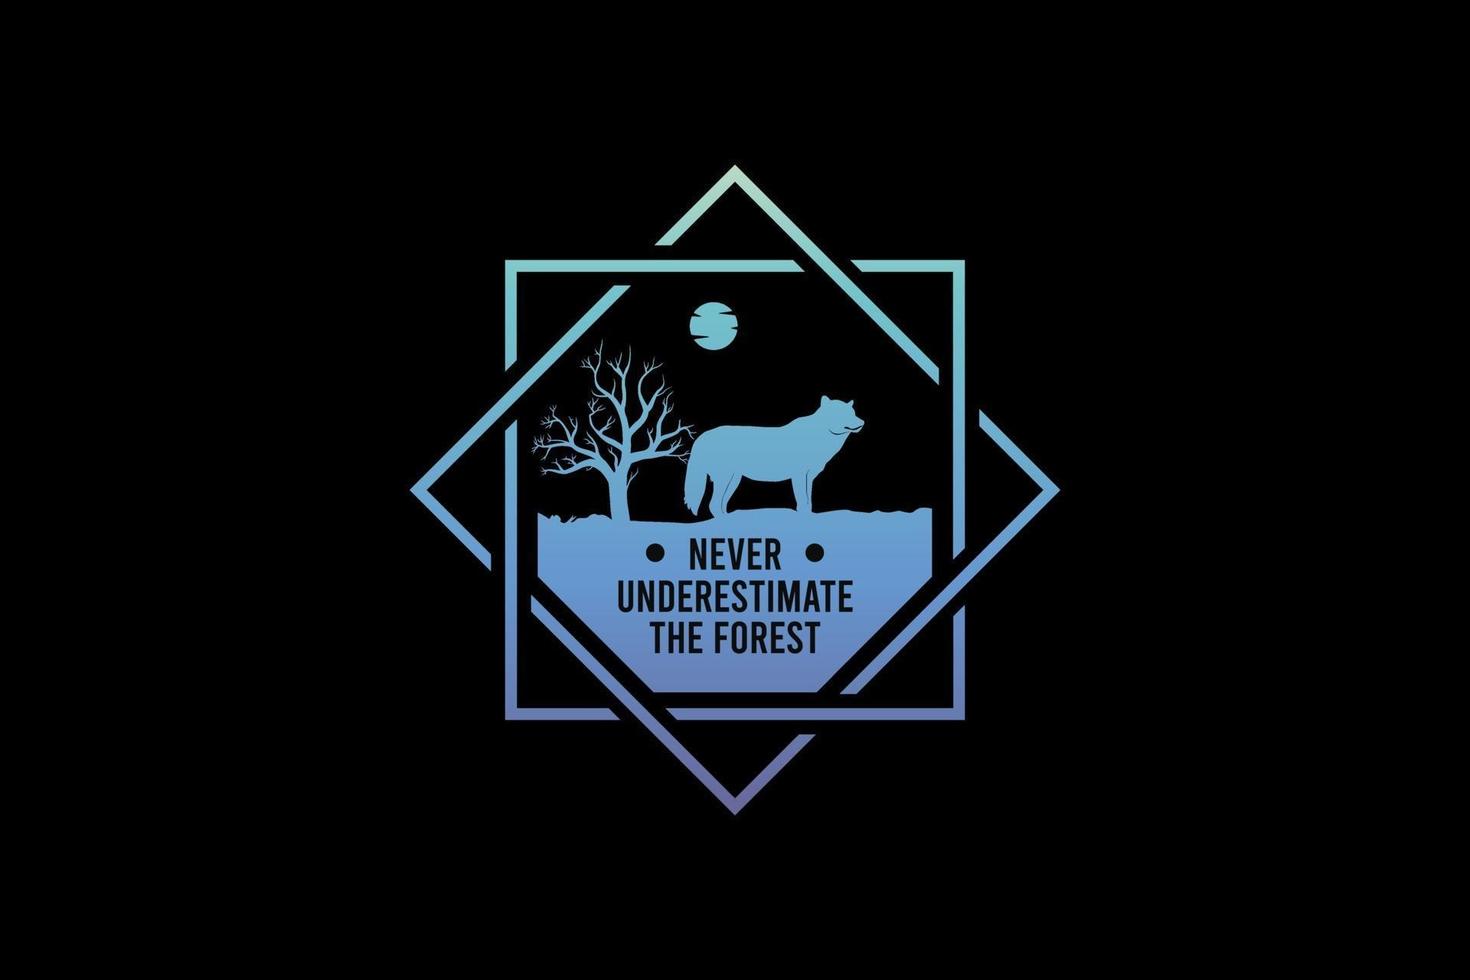 Never underestimate the forest, silhouette retro vintage style vector